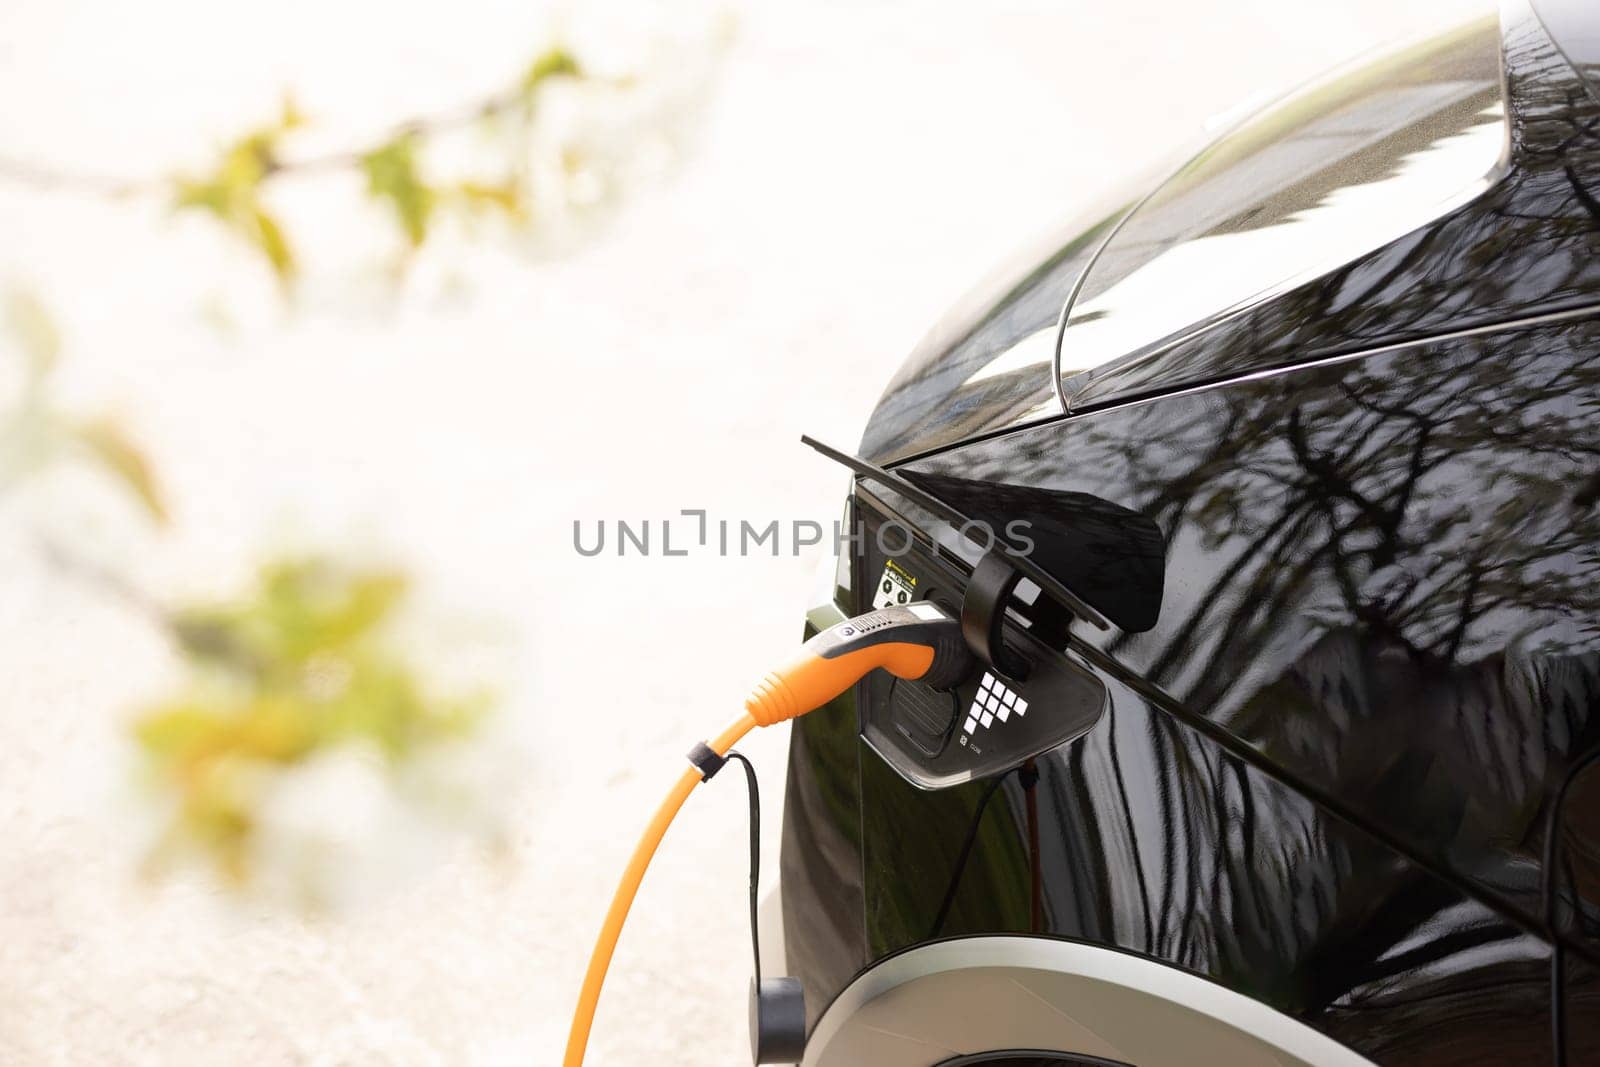 Electric vehicle charging port plugging in car. Charging technology, Clean energy filling technology. Electric car charging by uflypro